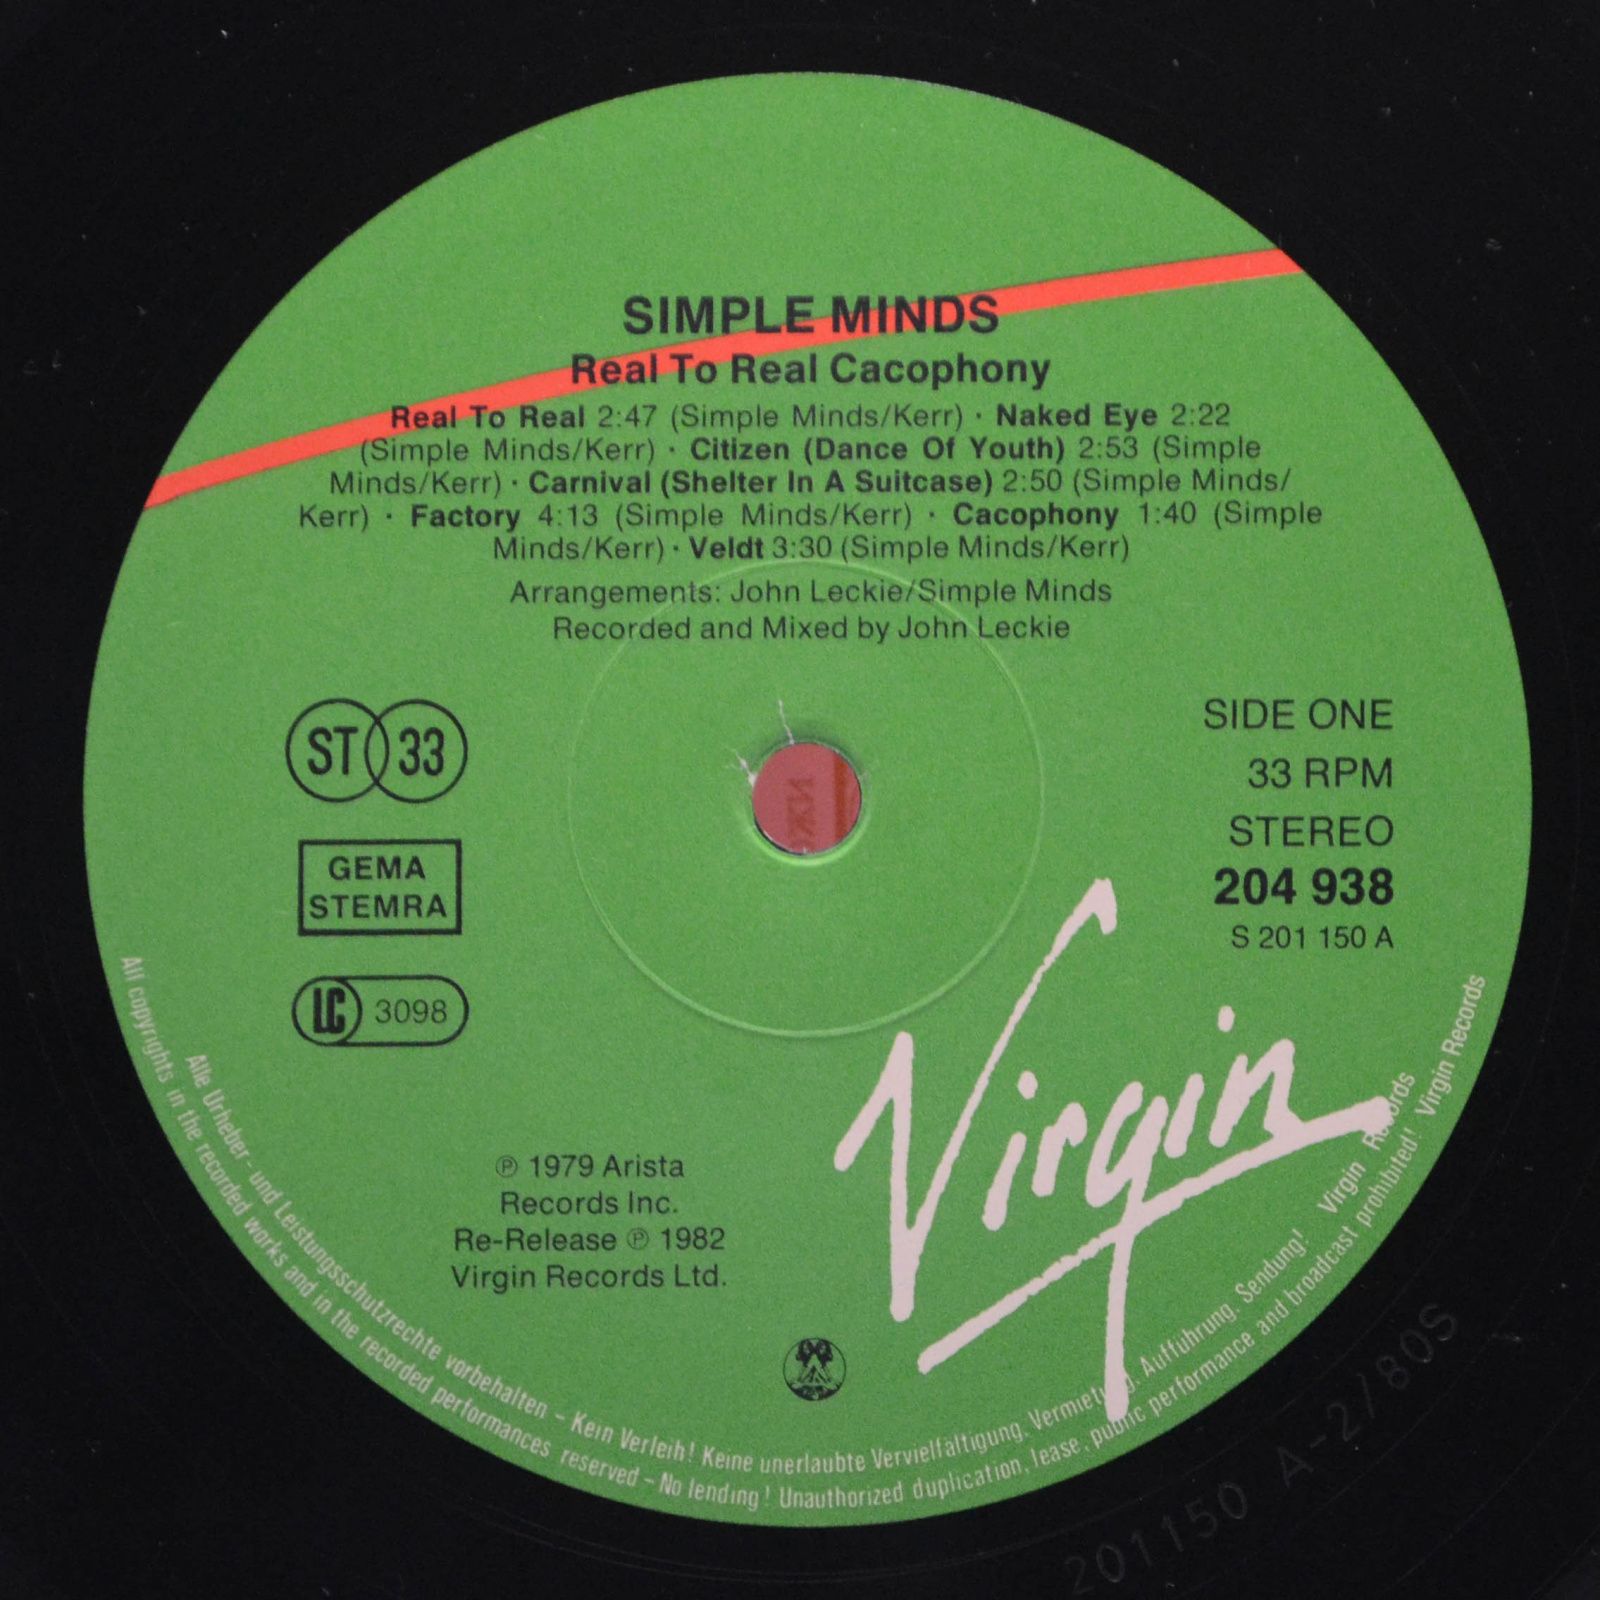 Simple Minds — Real To Real Cacophony, 1982